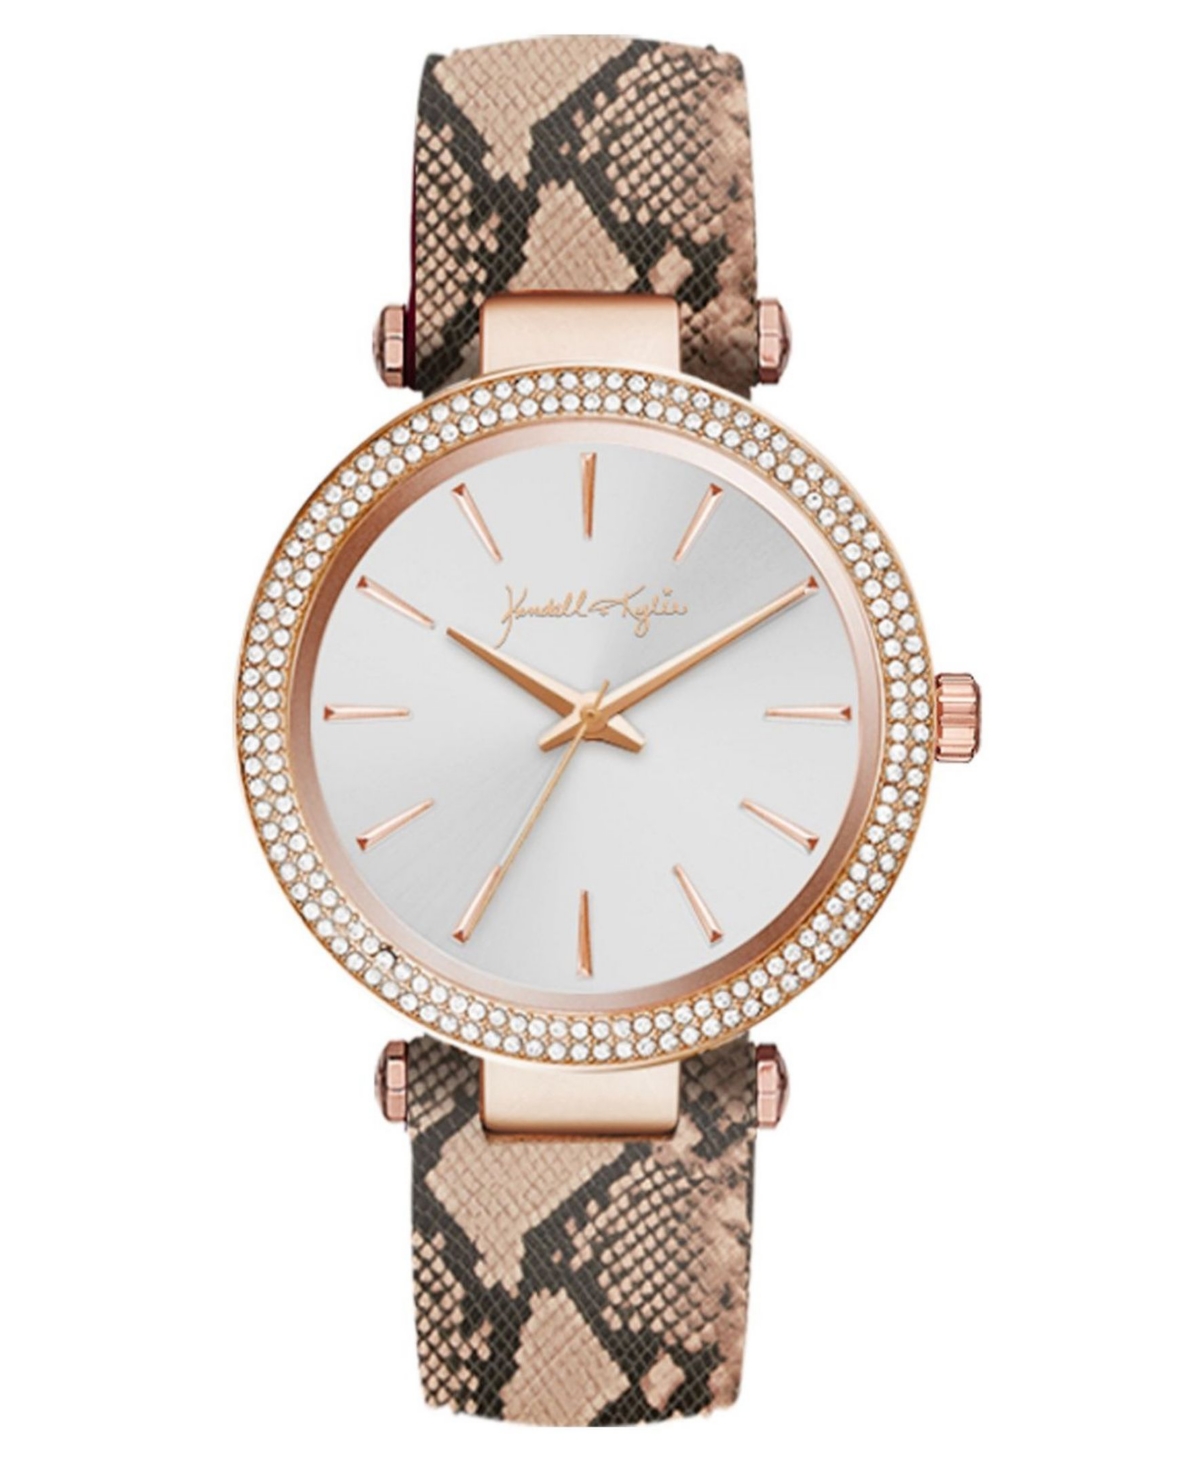 Women's Kendall + Kylie Rose Gold Tone with Blush Snakeskin Stainless Steel Strap Analog Watch 40mm - Open Misce